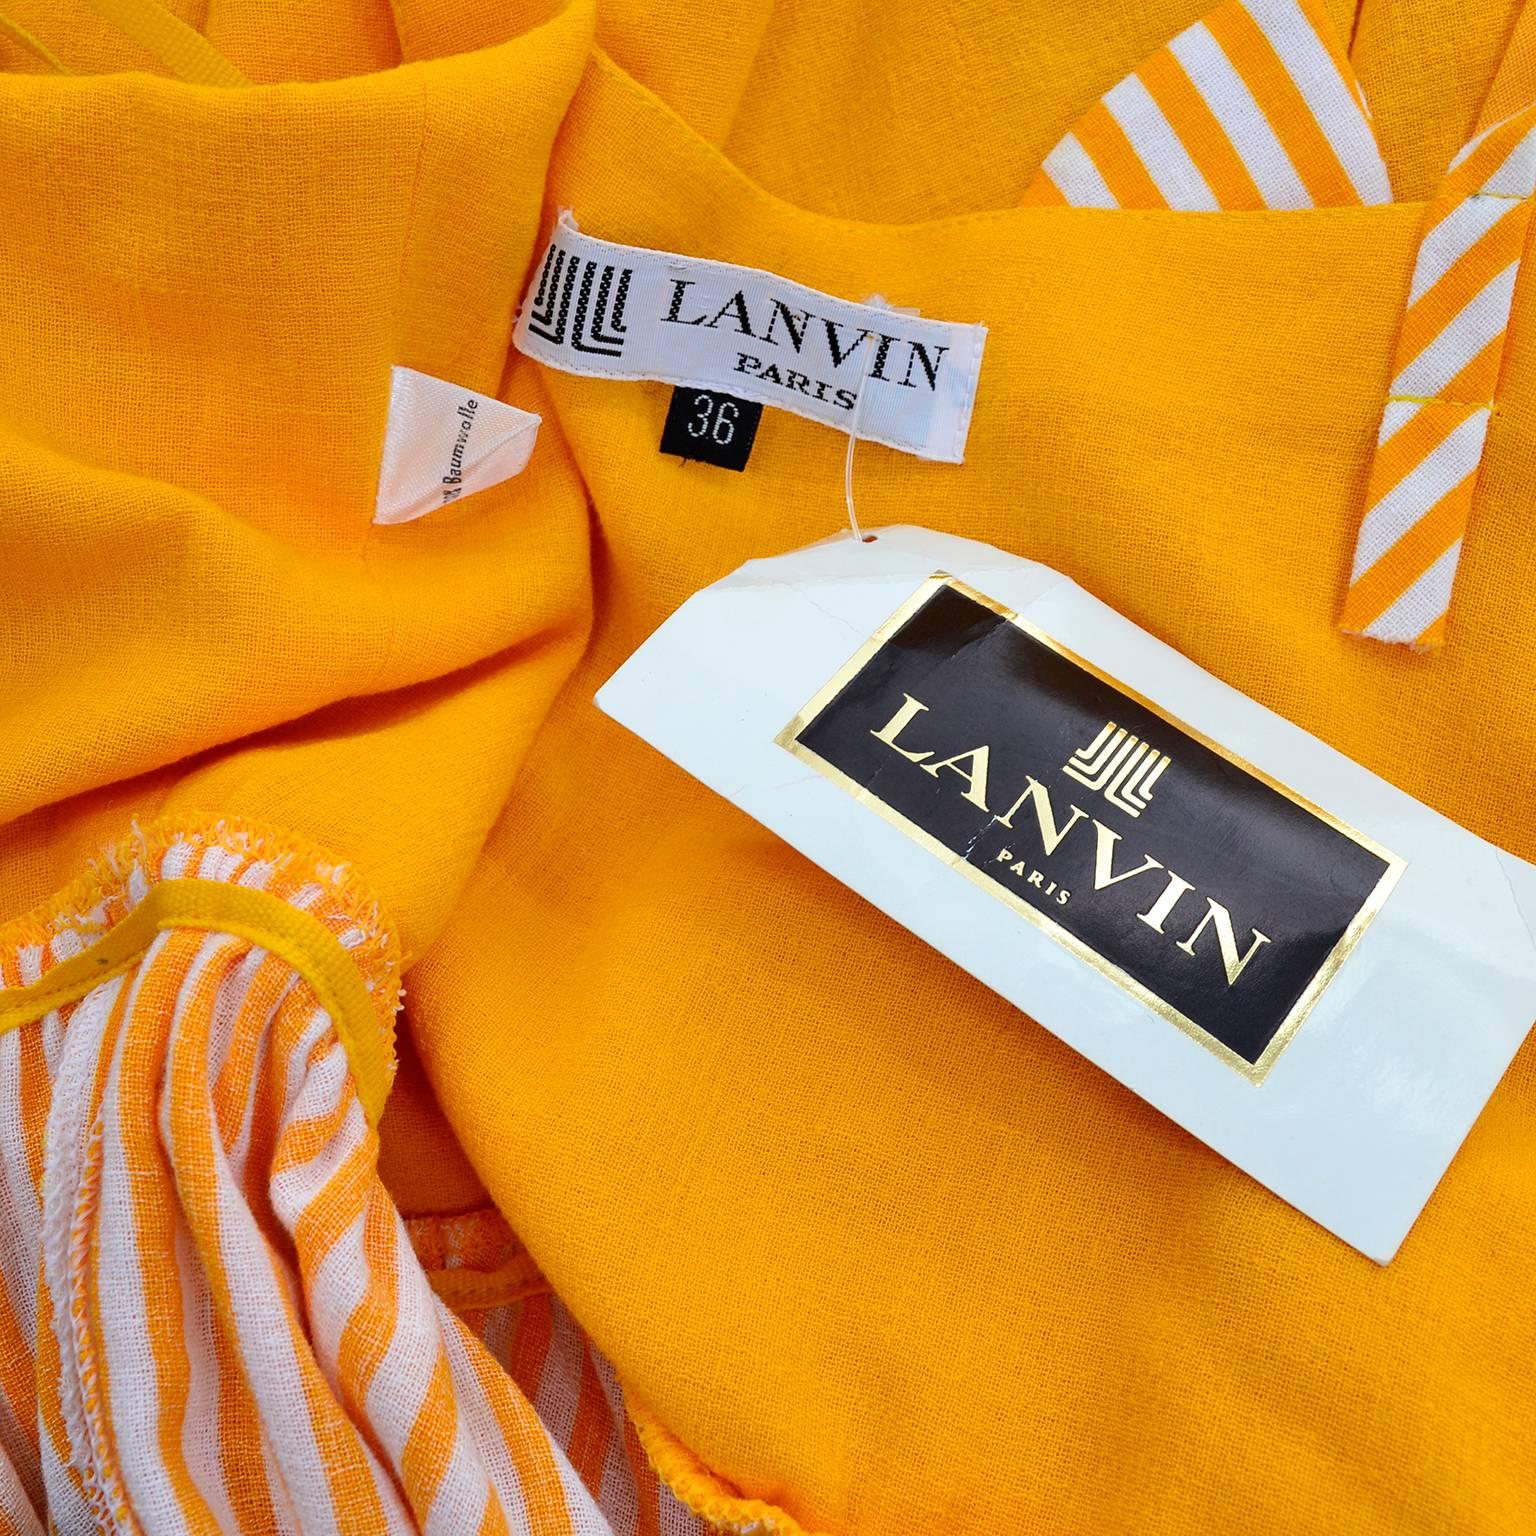 Lanvin Dress Deadstock 1970s Marigold Yellow Striped Vintage Sundress w Tags For Sale 2